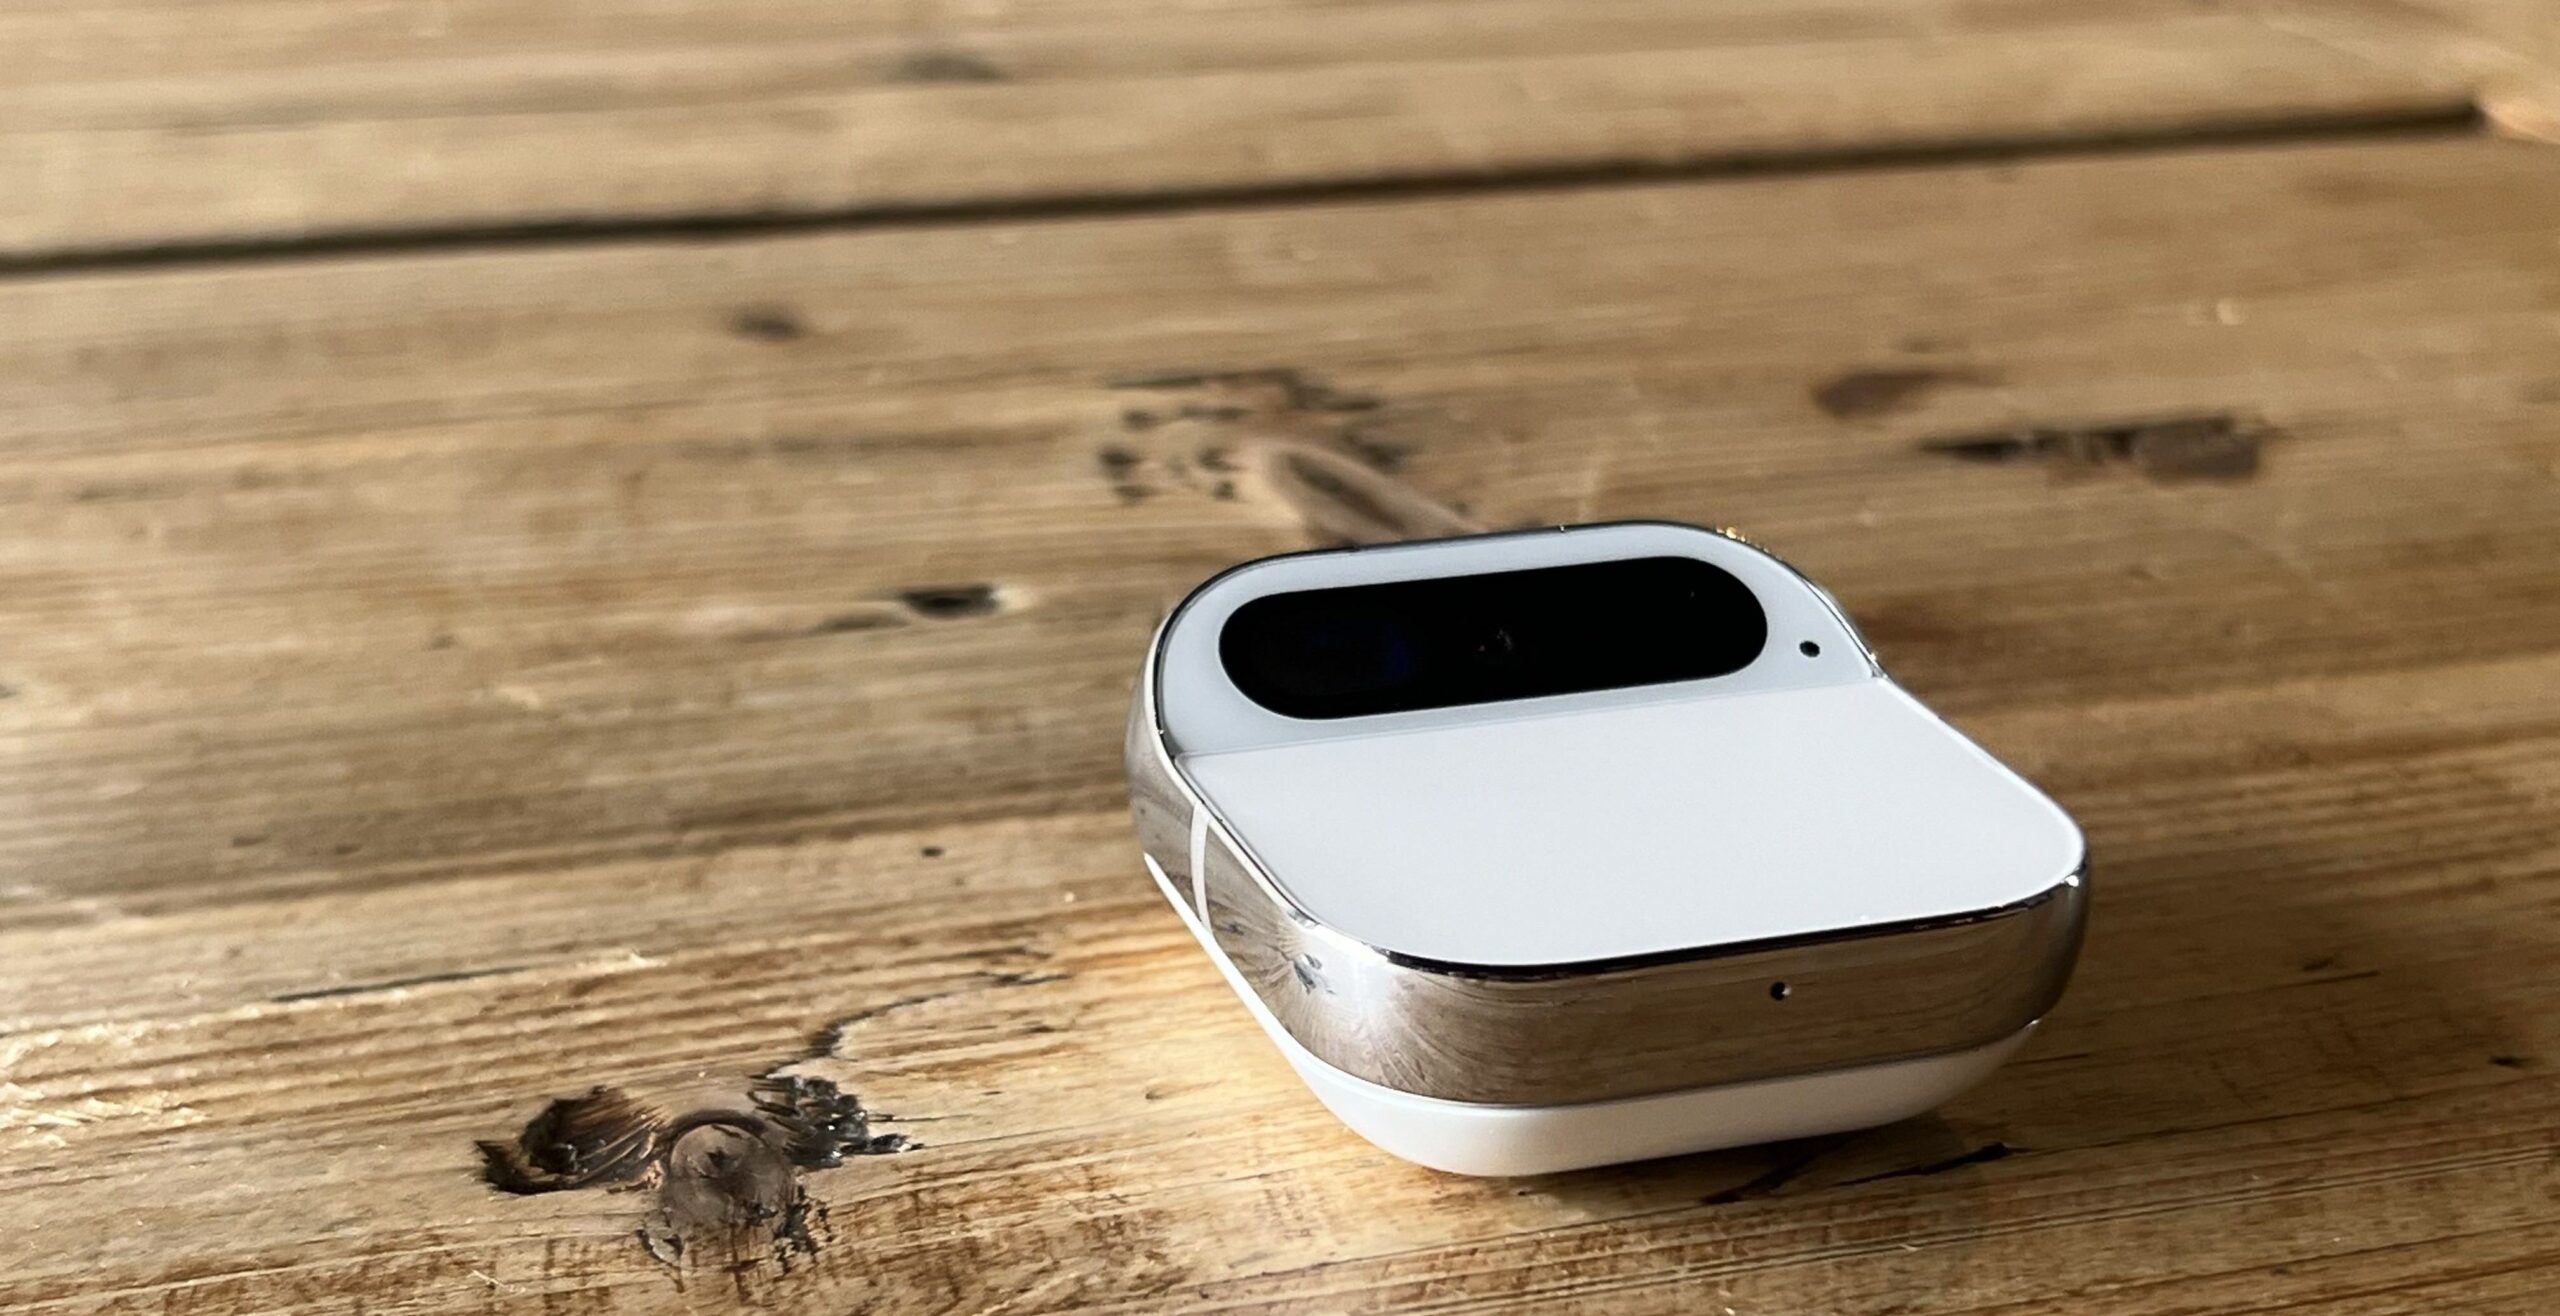  This image features a close-up of a modern, minimalist design earbud case placed on a textured wooden surface. The case is white with a rounded shape and a metallic accent, likely indicating where it opens. The case is partially open, revealing a glimpse of the black interior where the earbuds would be housed. There is a small knot in the wood directly next to the case, adding a rustic element to the sleek technology.